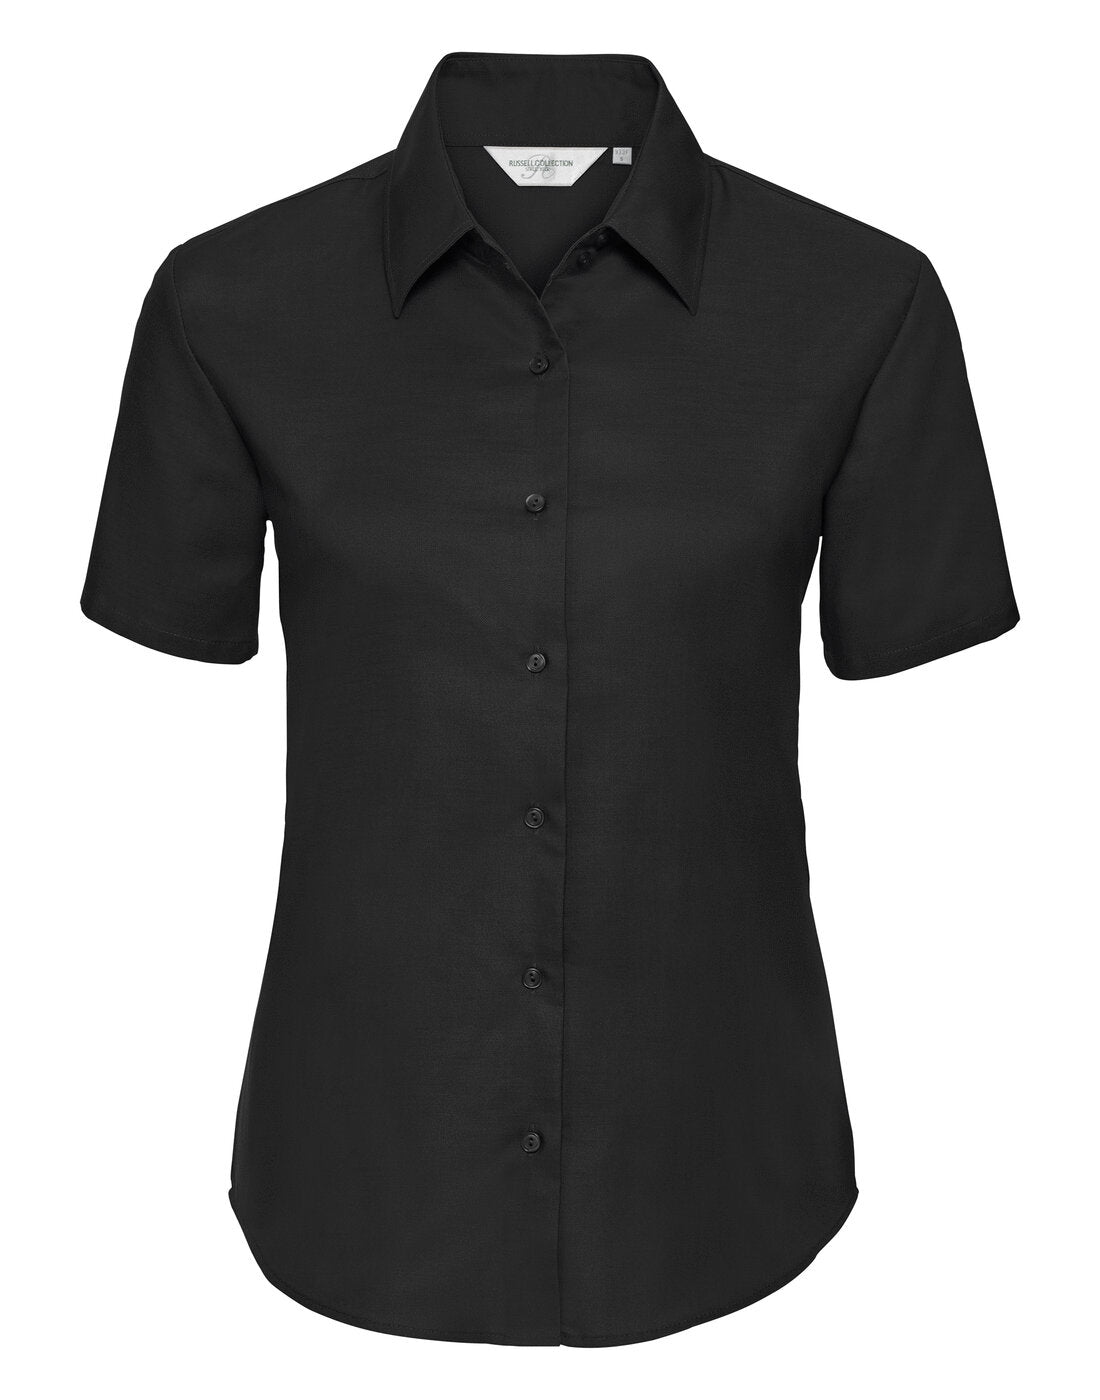 Russell Ladies Short Sleeve Tailored Oxford Shirt Black